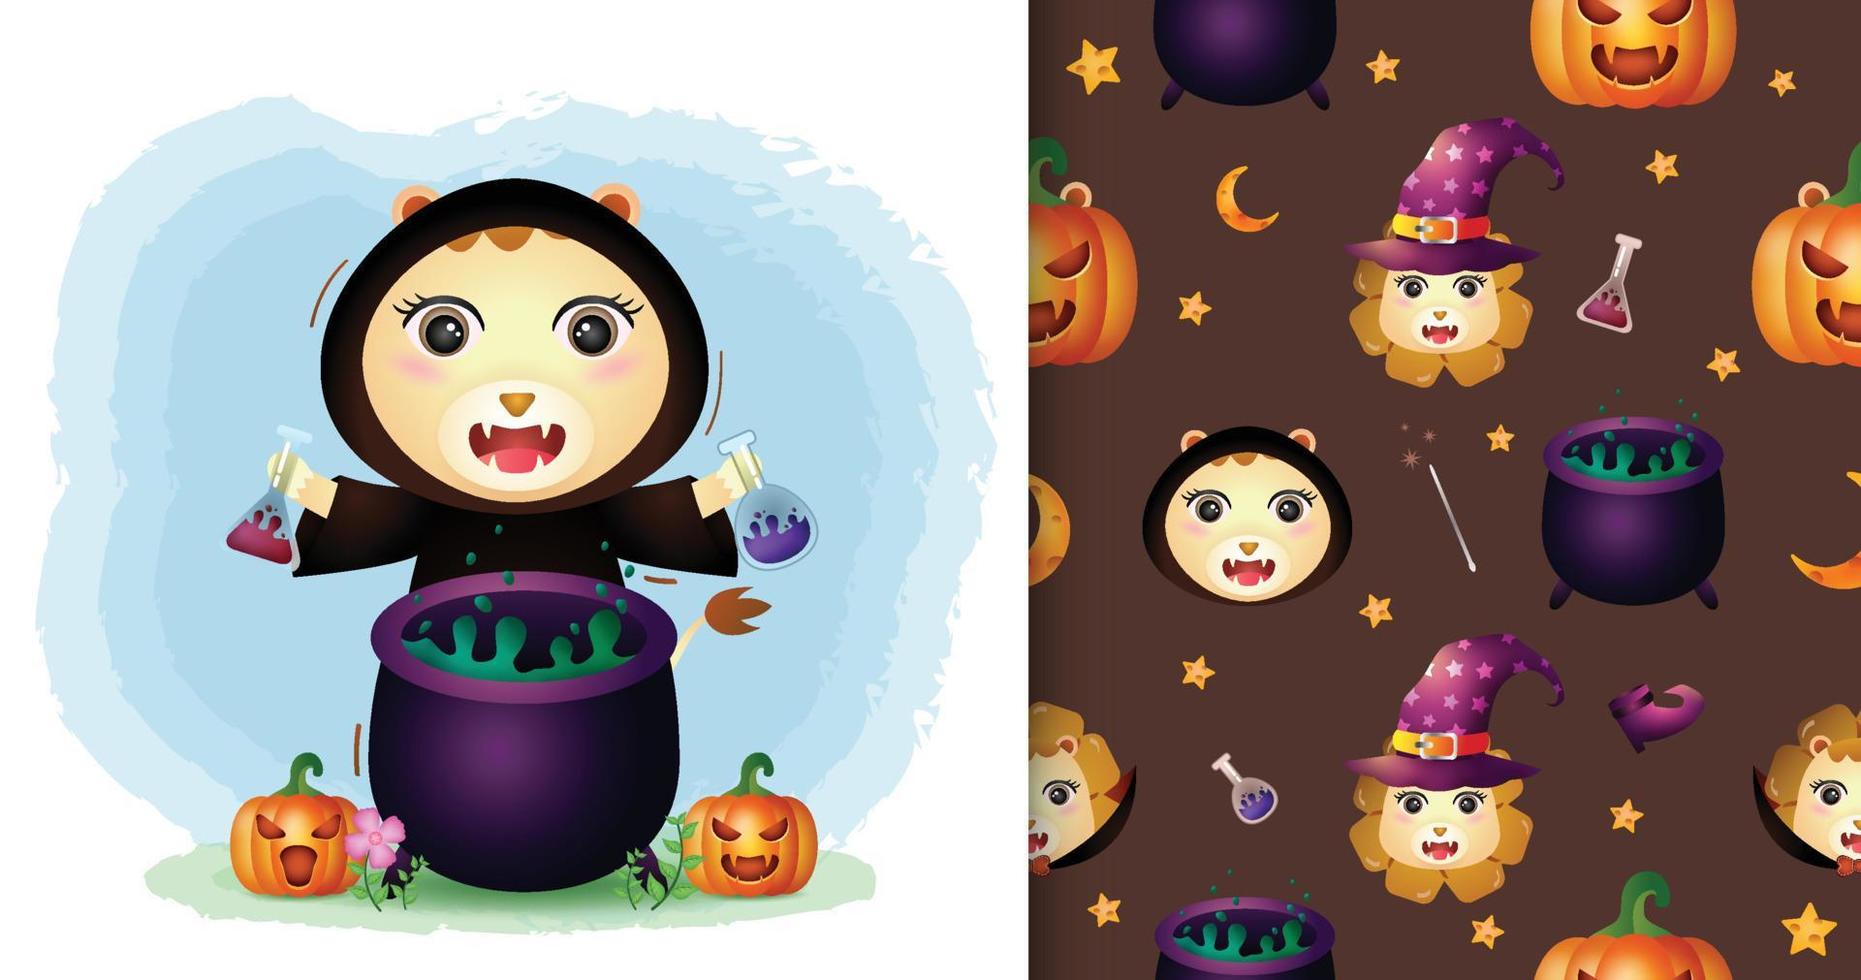 a cute lion with witch costume halloween character collection. seamless pattern and illustration designs vector